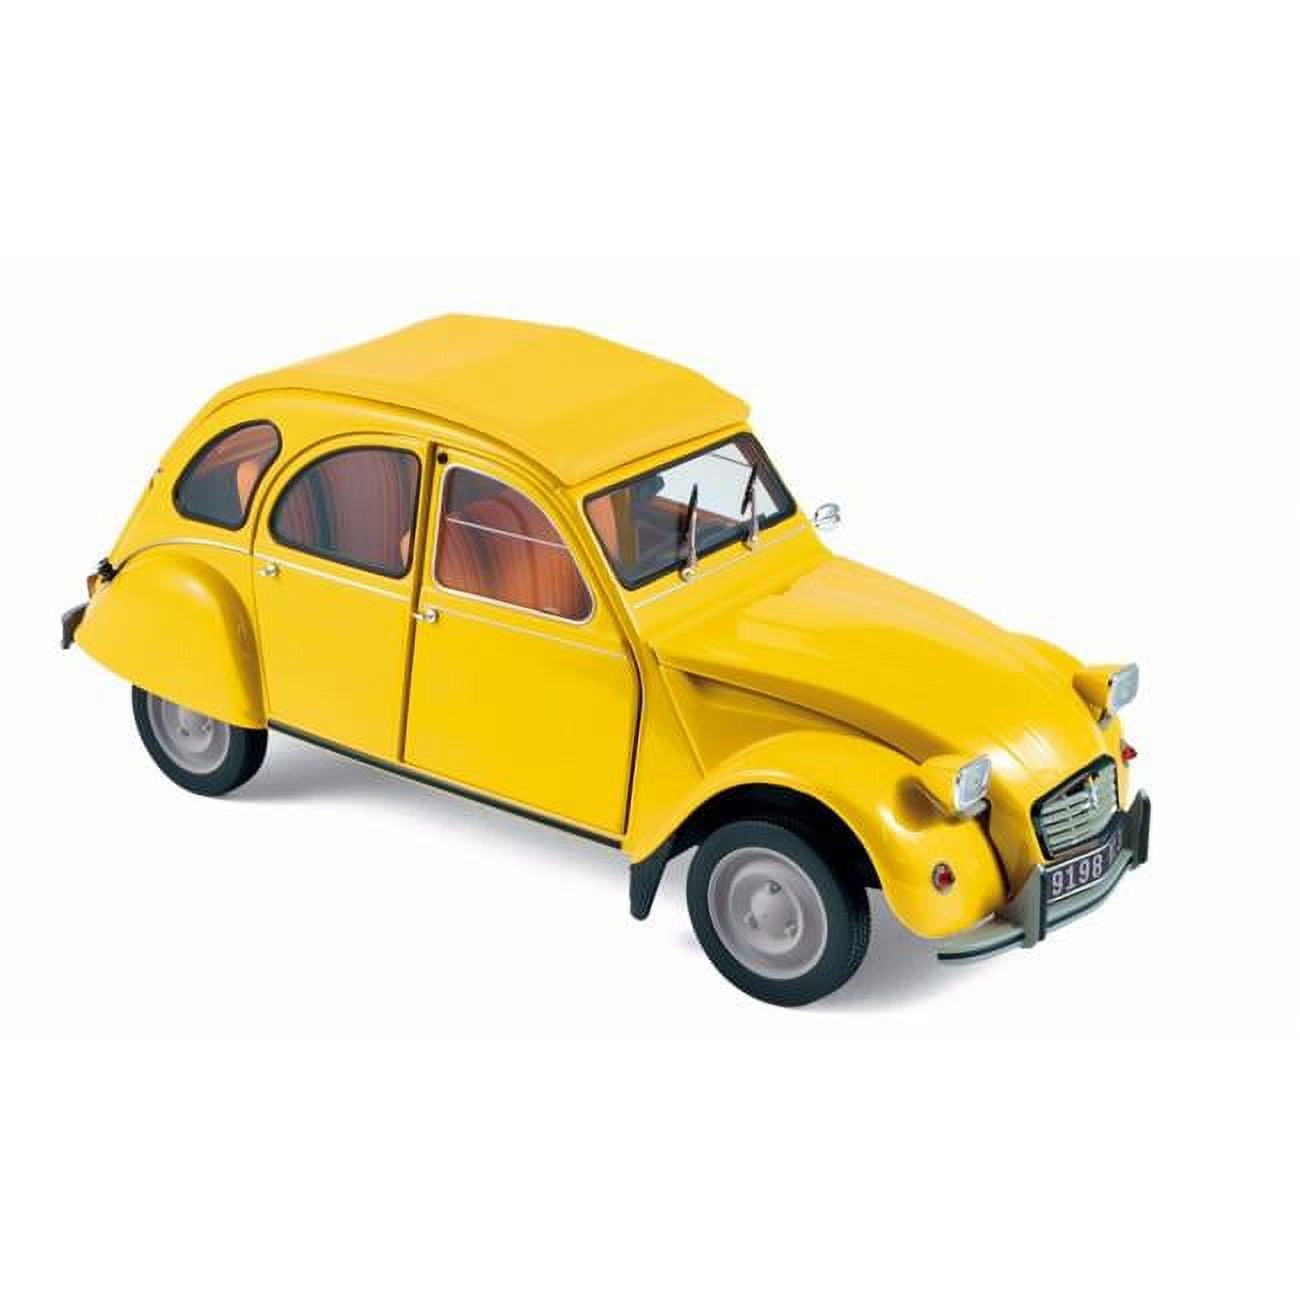 Norev 181496 1979 Citroen 2CV 6 Club 1 by 18 Scale Diecast Model Car -  Mimosa Yellow